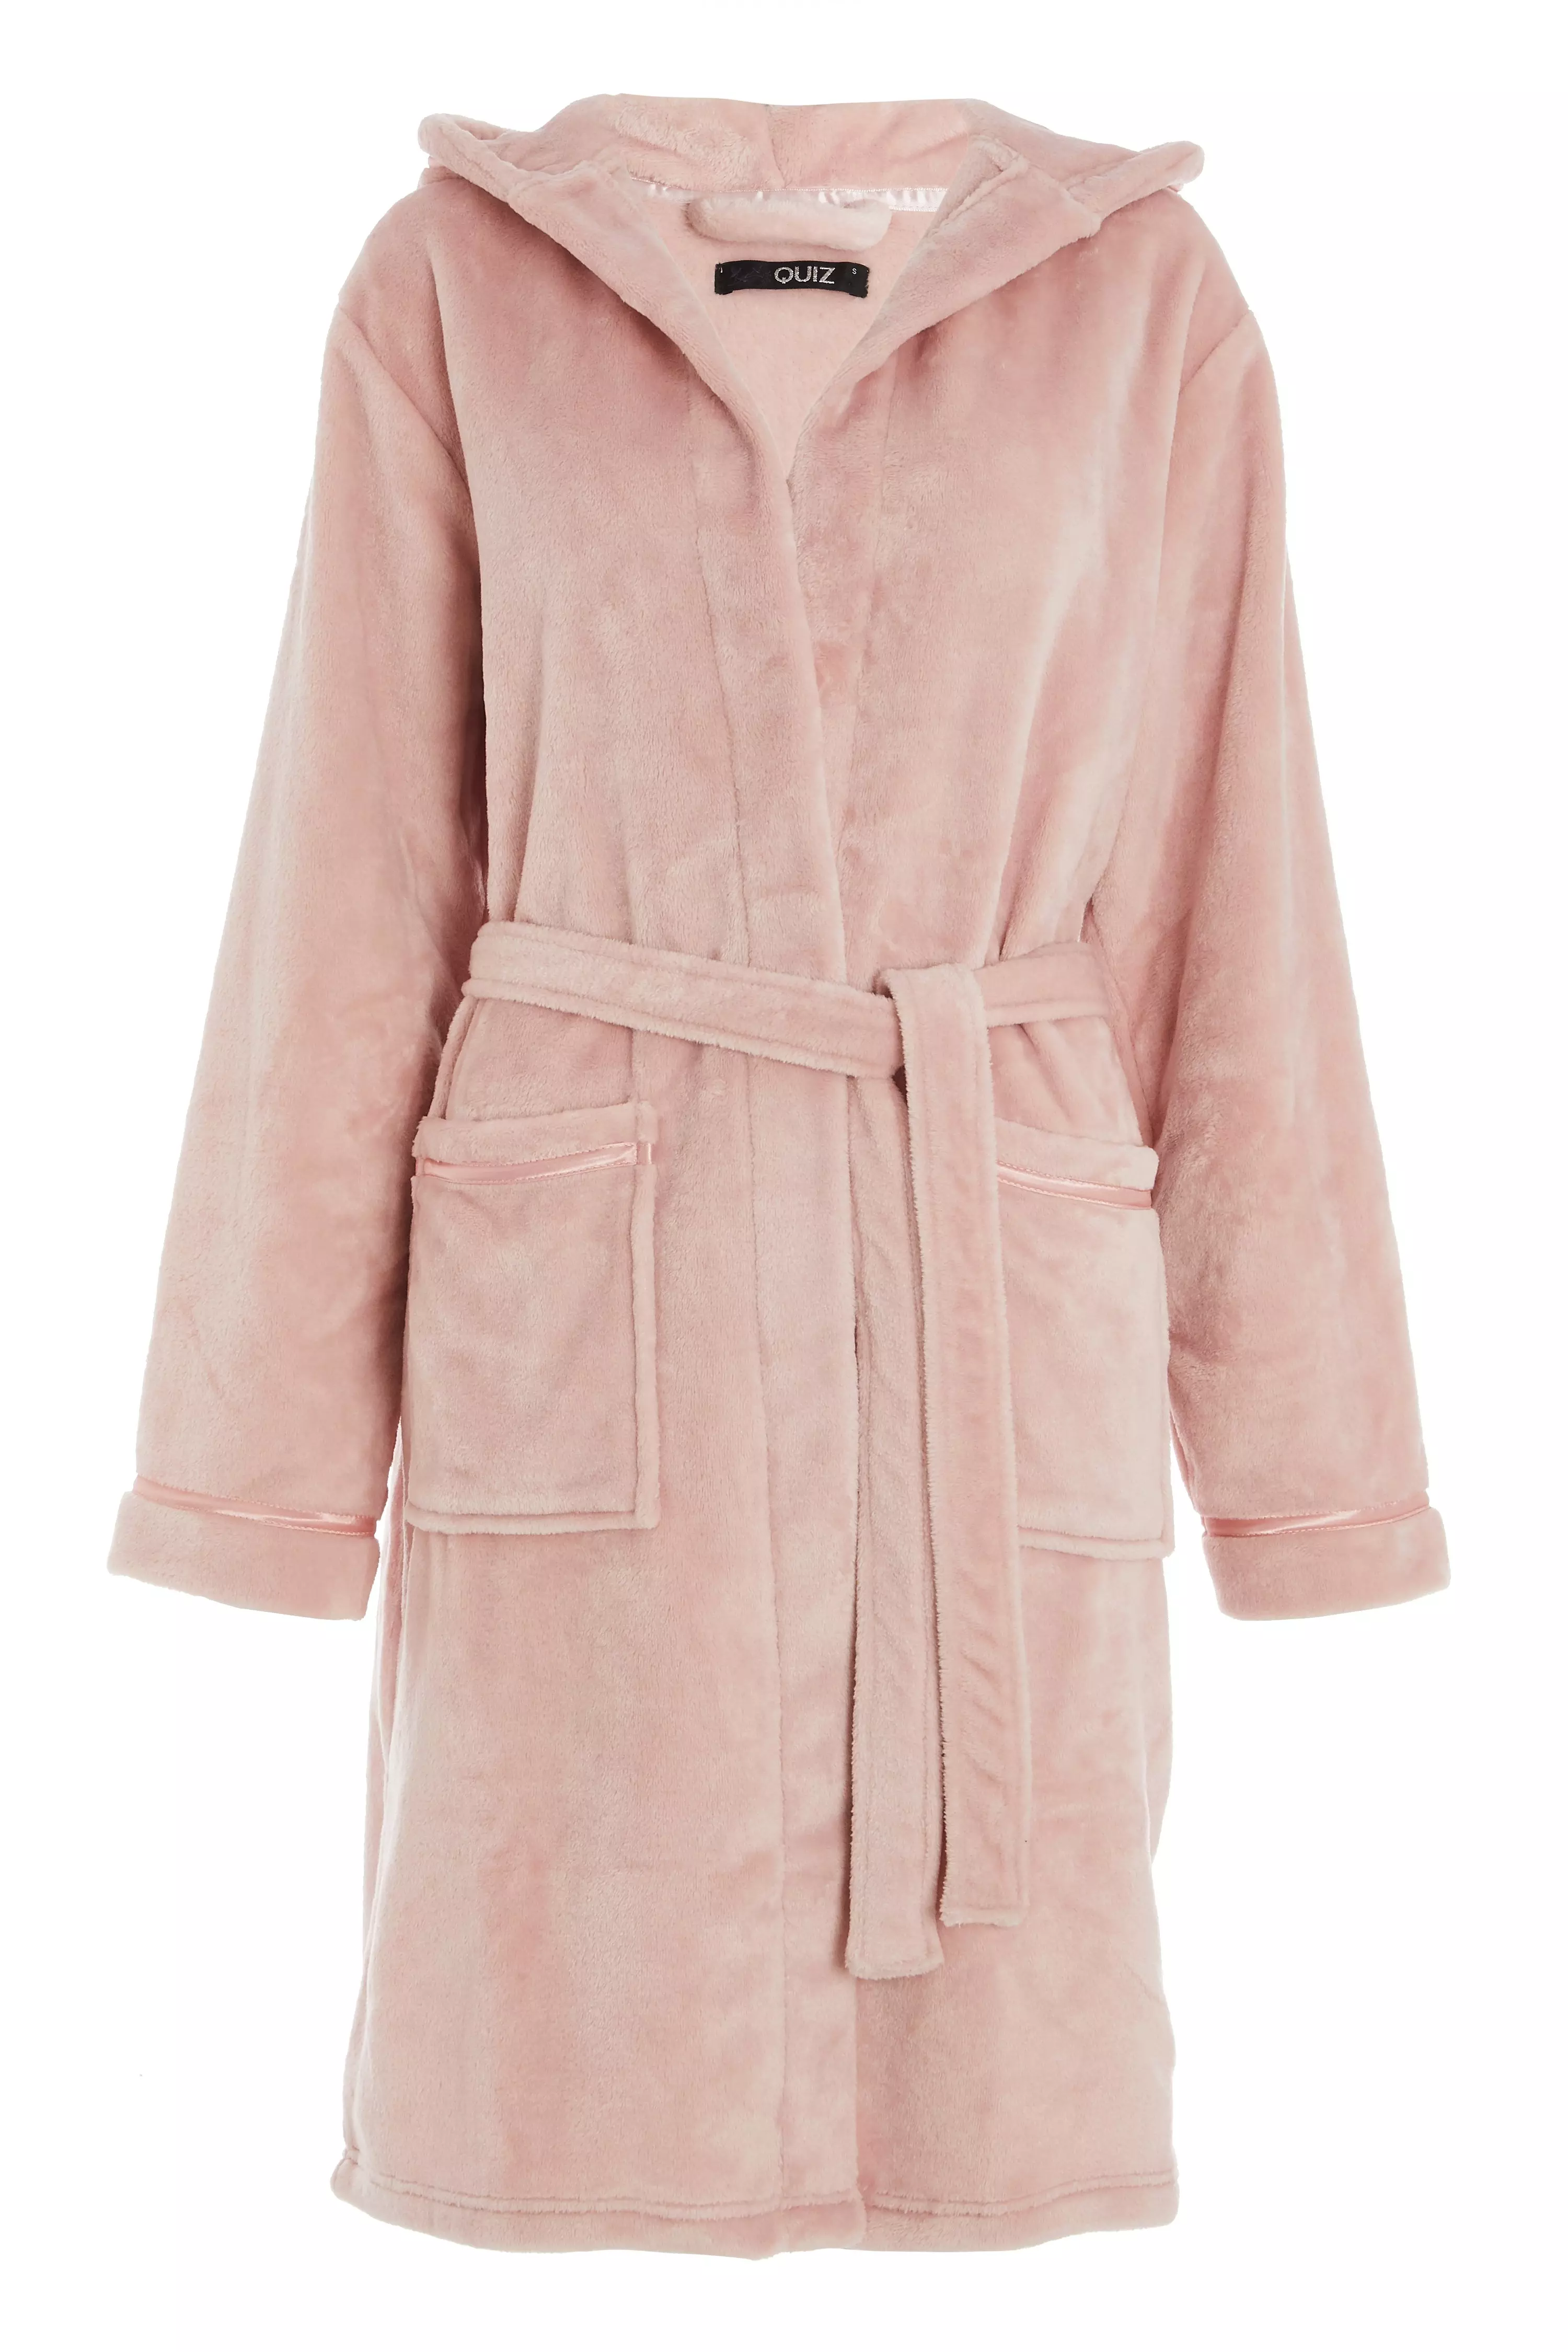 Pink Hooded Robe